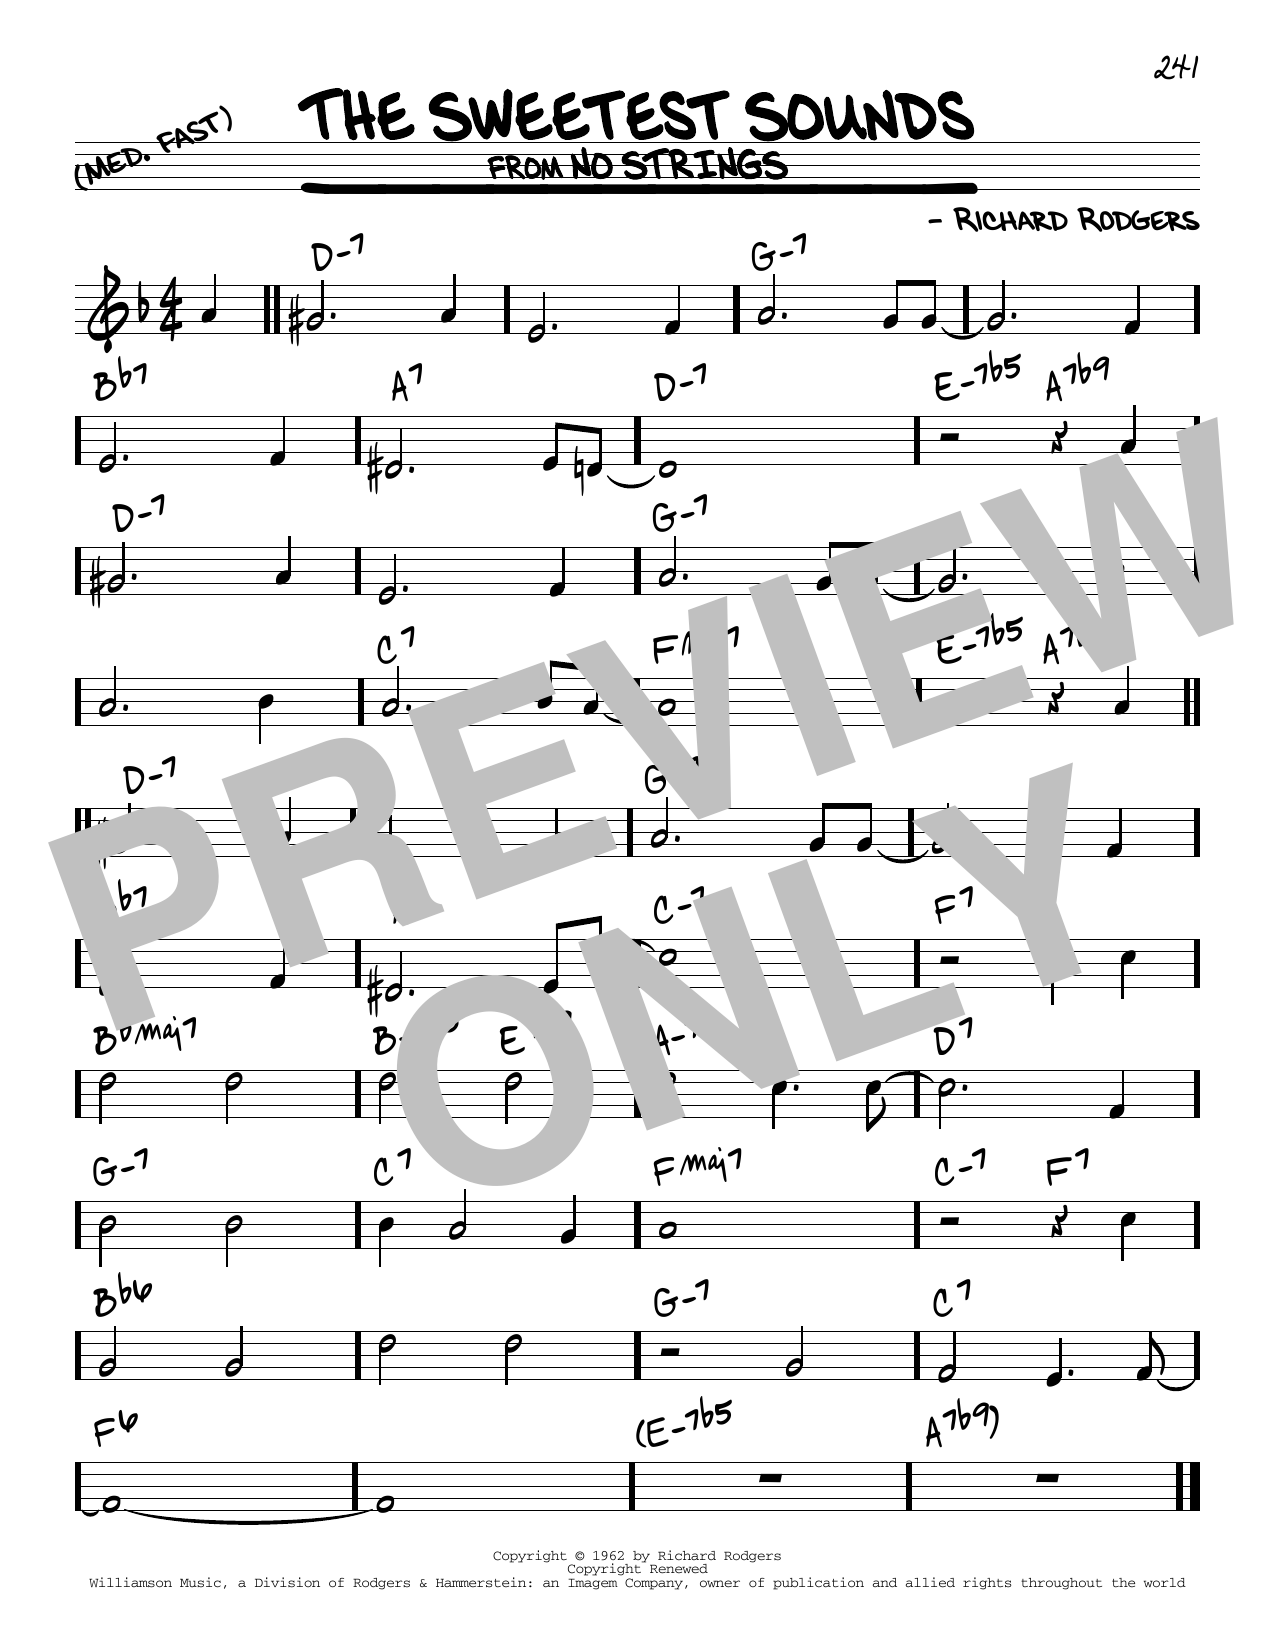 Download Richard Rodgers The Sweetest Sounds Sheet Music